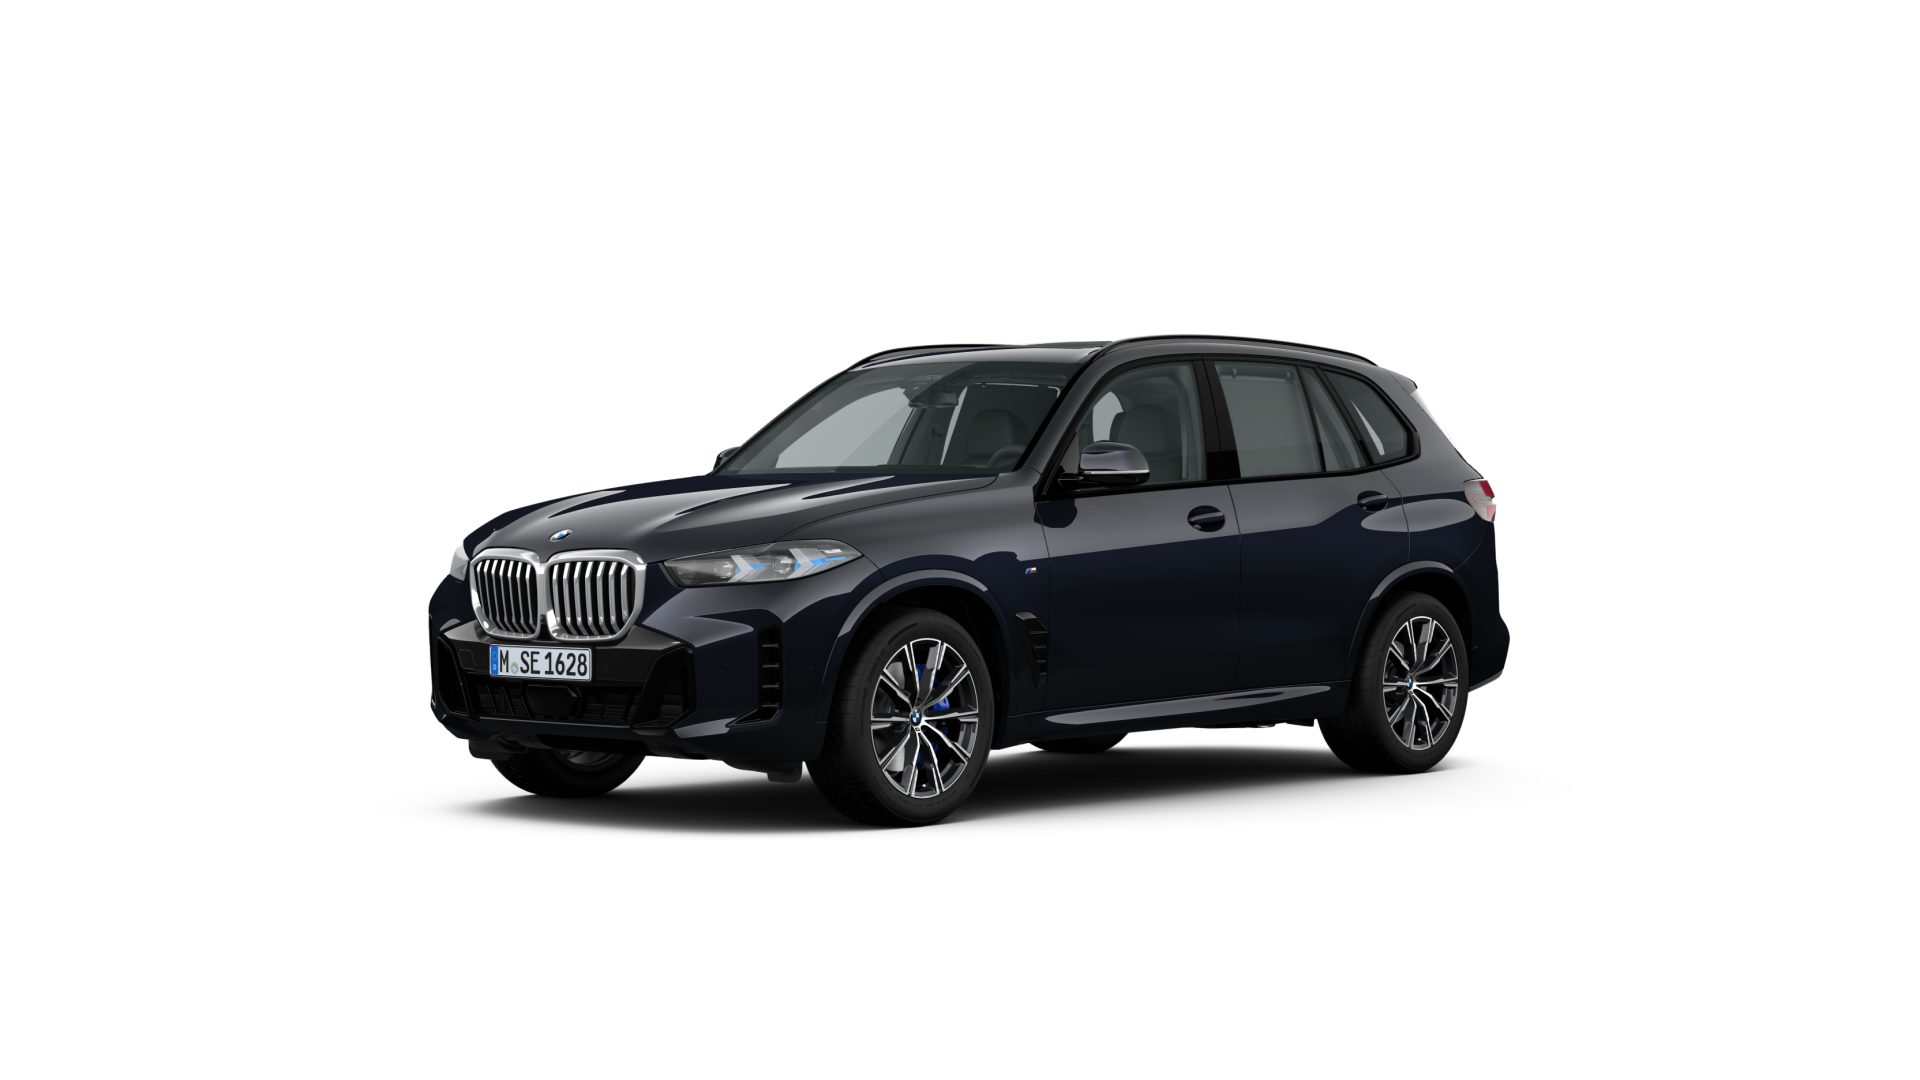 Bmw x5 xdrive40i 7 seater m sport edition front side